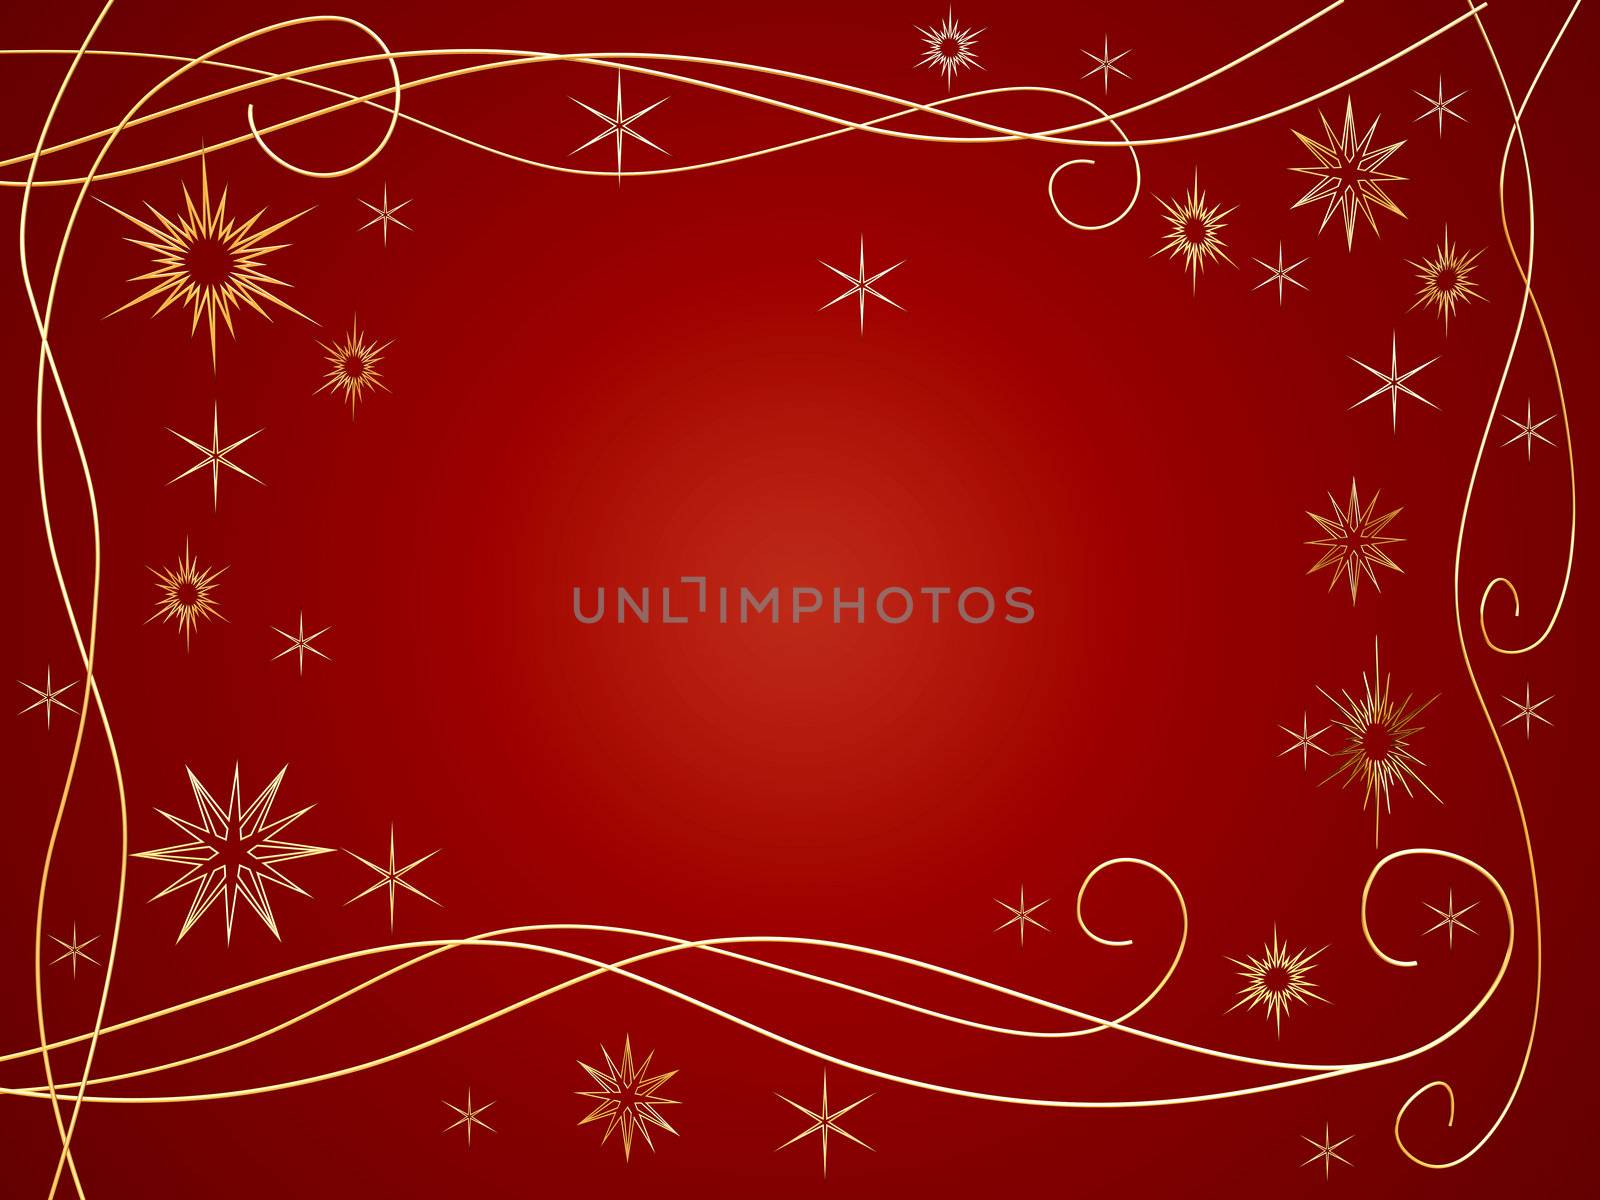 3d golden snowflakes over red background with feather center
